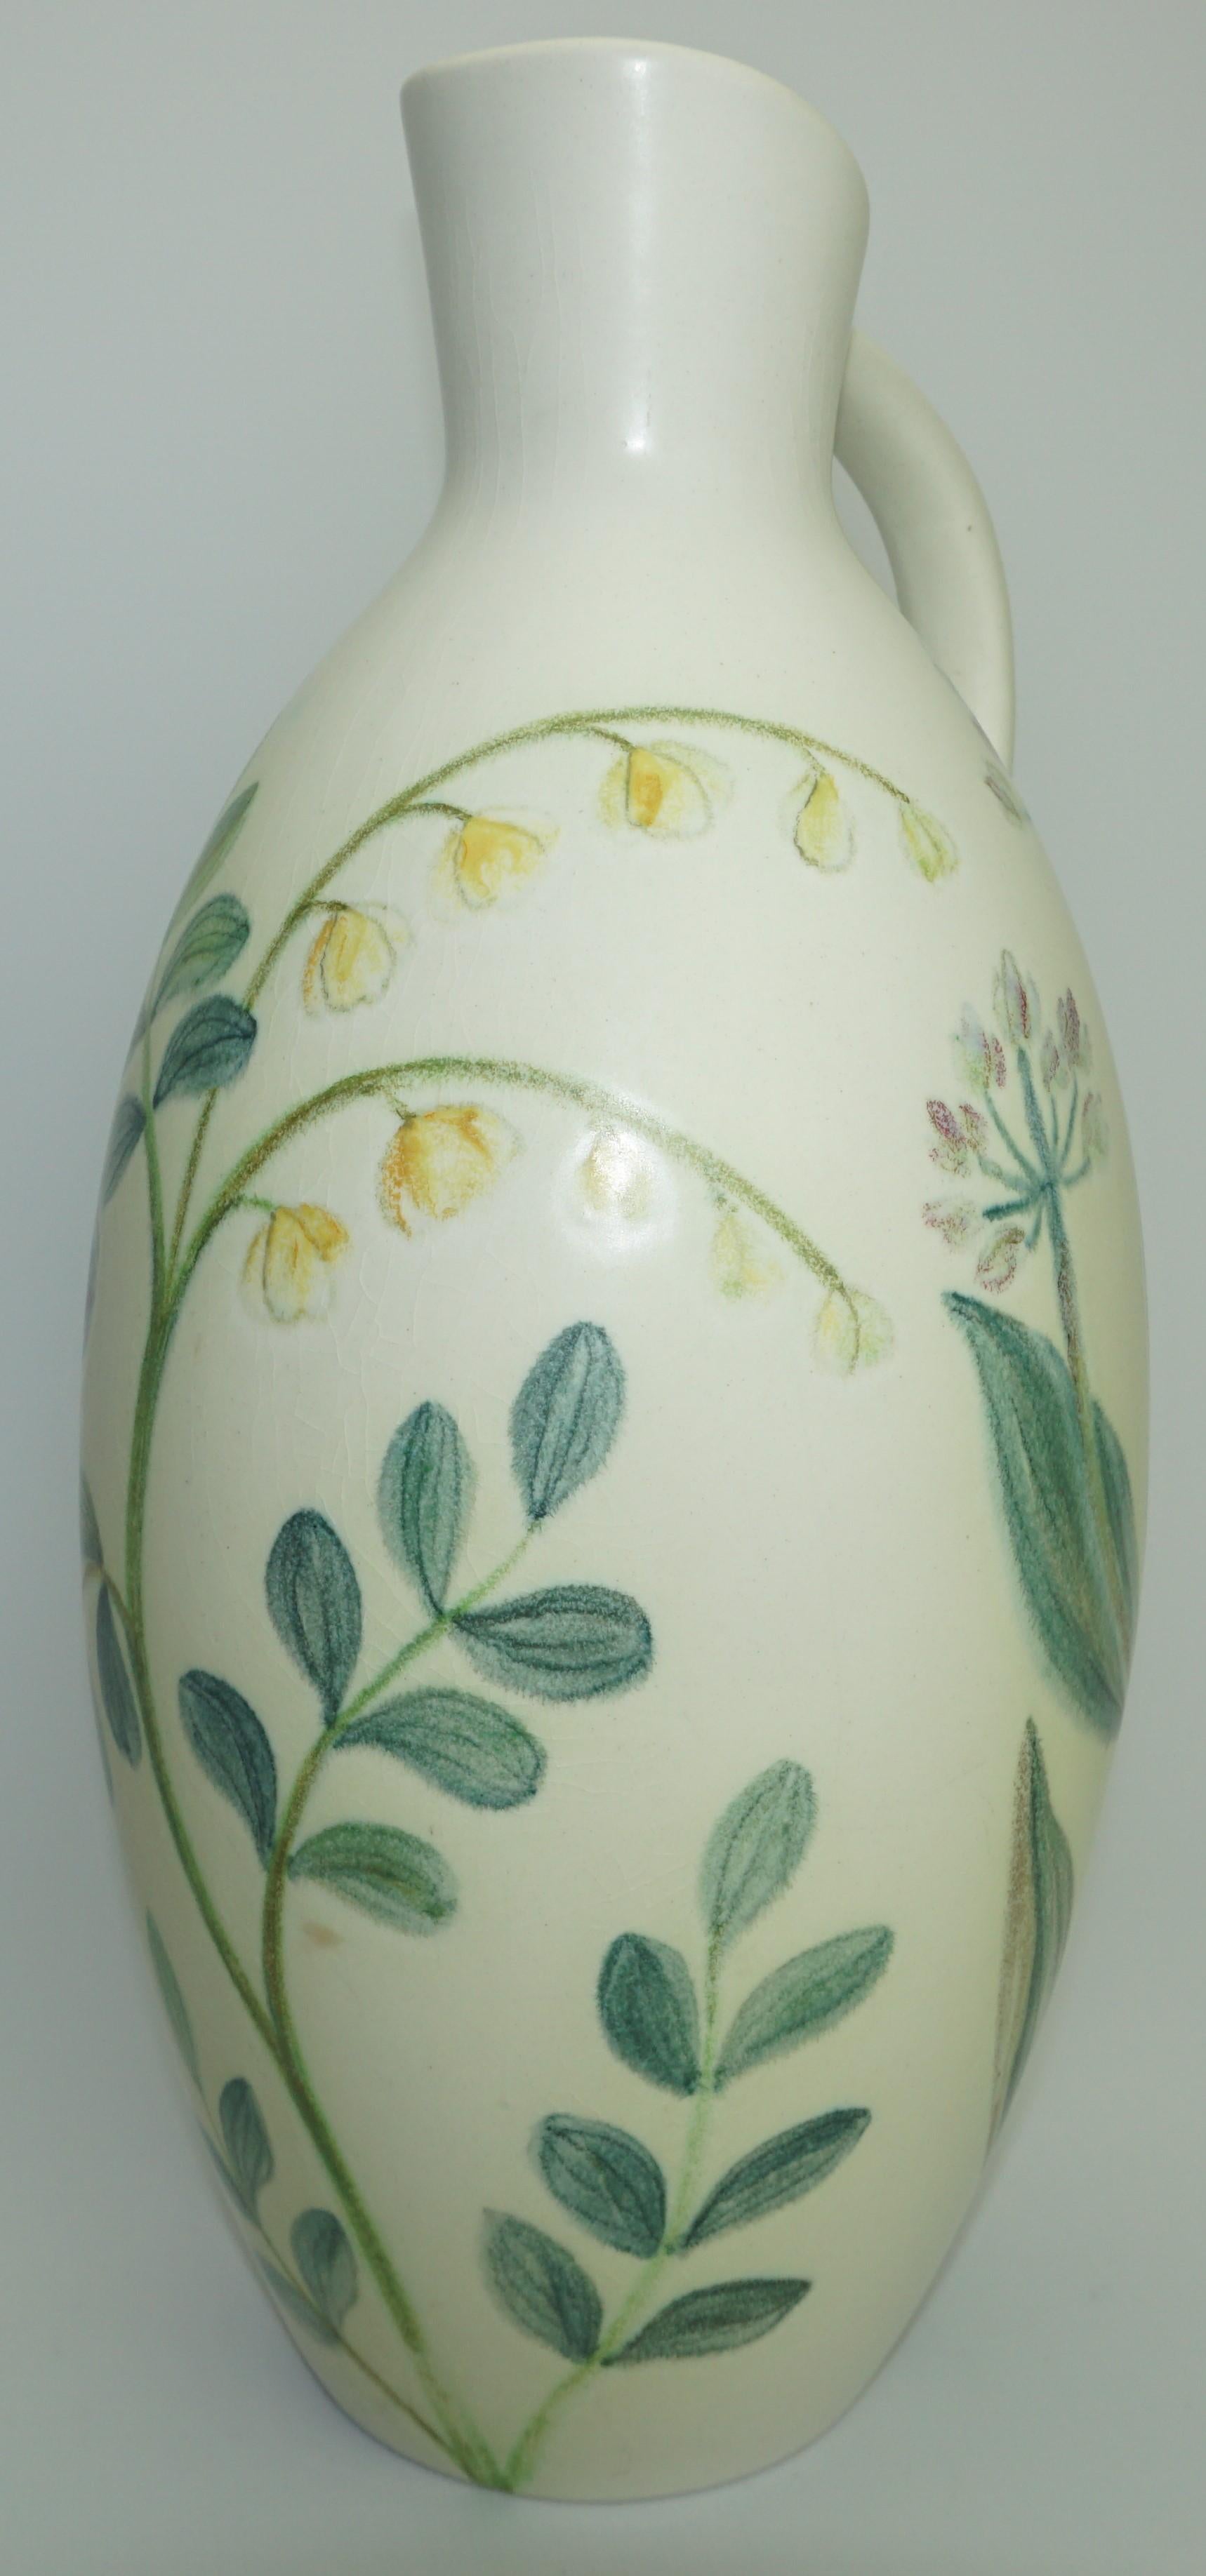 Decorative vase by Carl-Harry Stalhane, Sweden, circa 1950. Beautiful floral pattern. Very good condition.